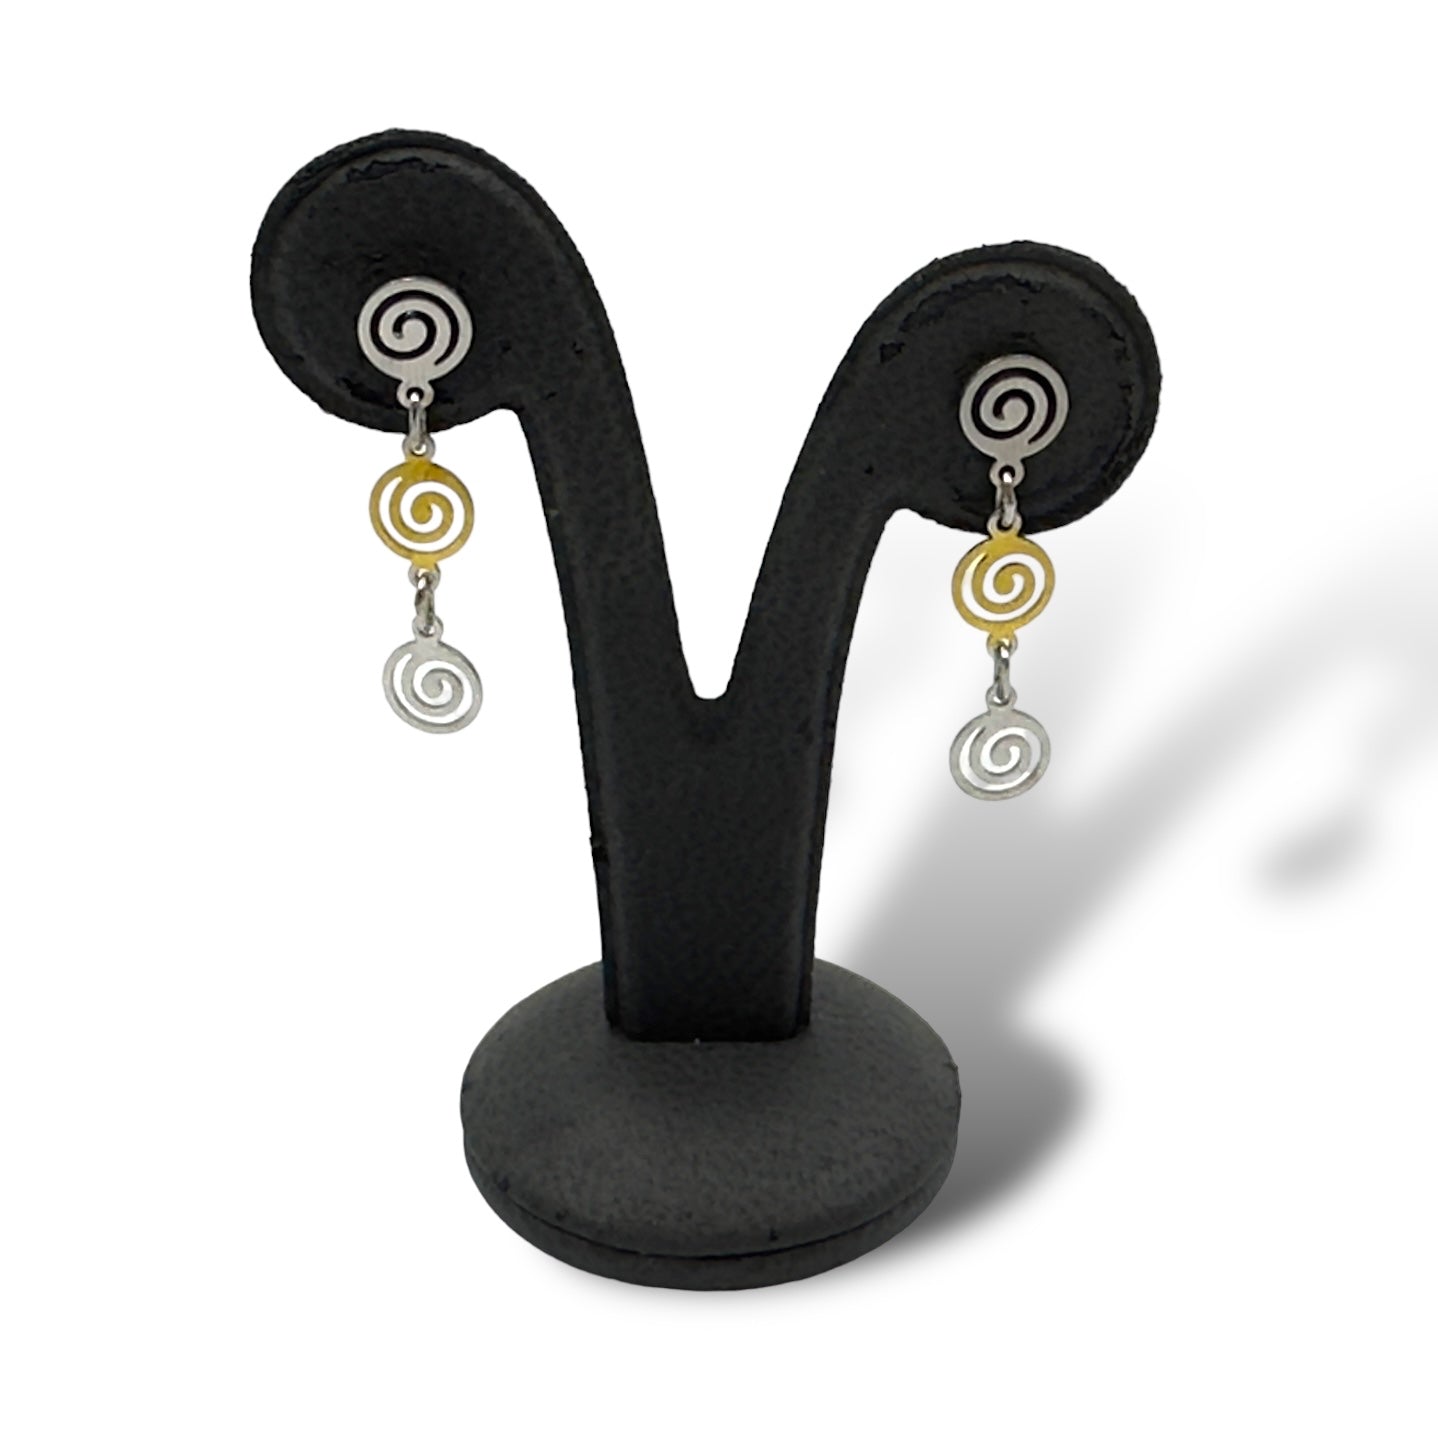 Silver two-toned Spiral design earrings